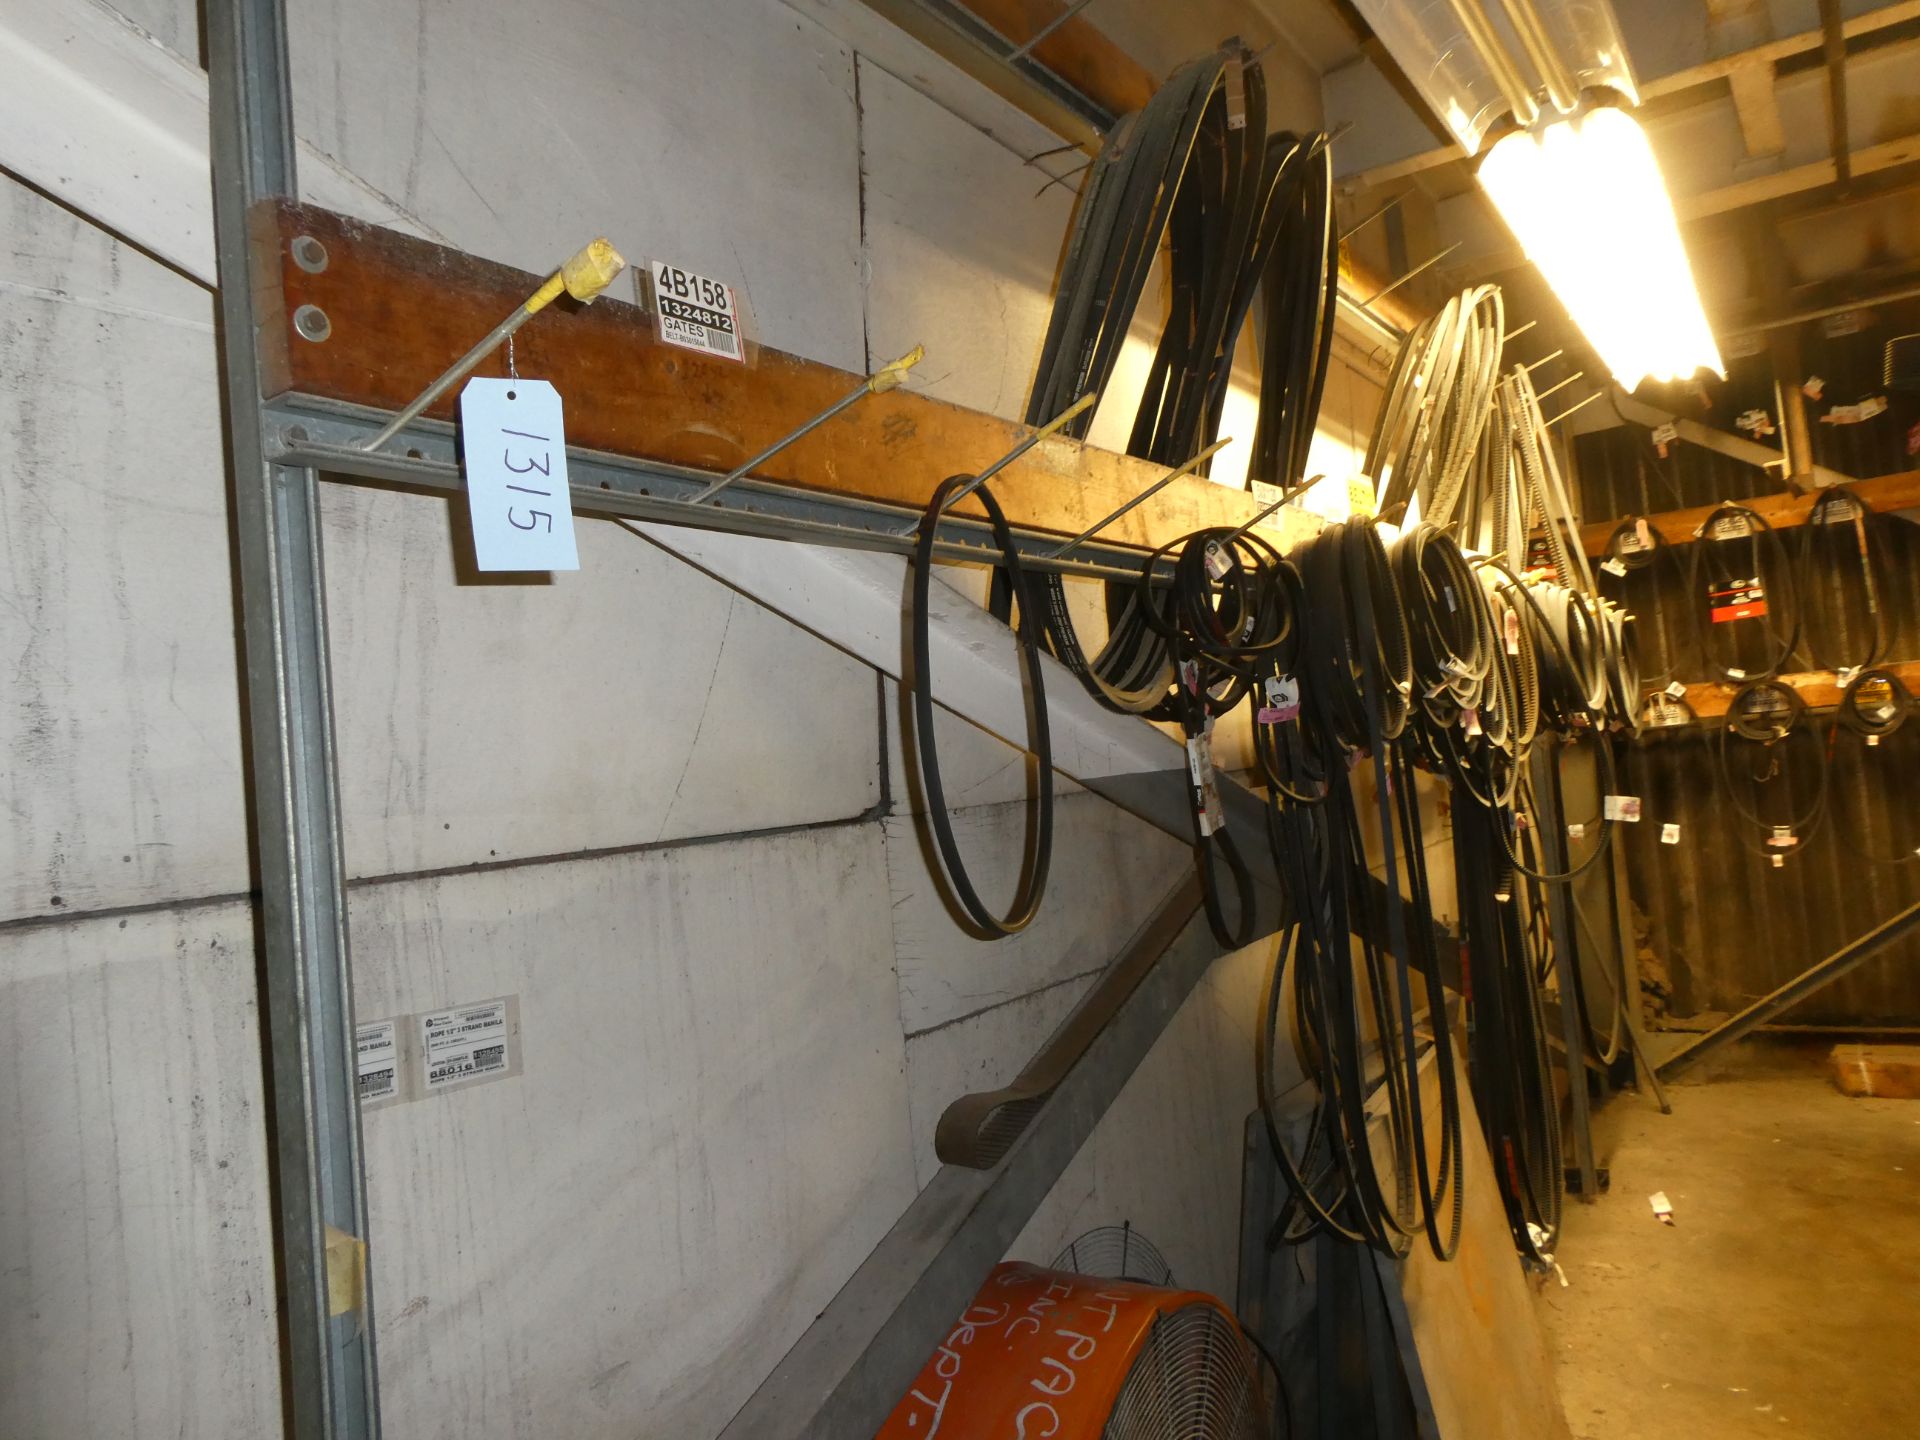 Belts on Rack and Wall